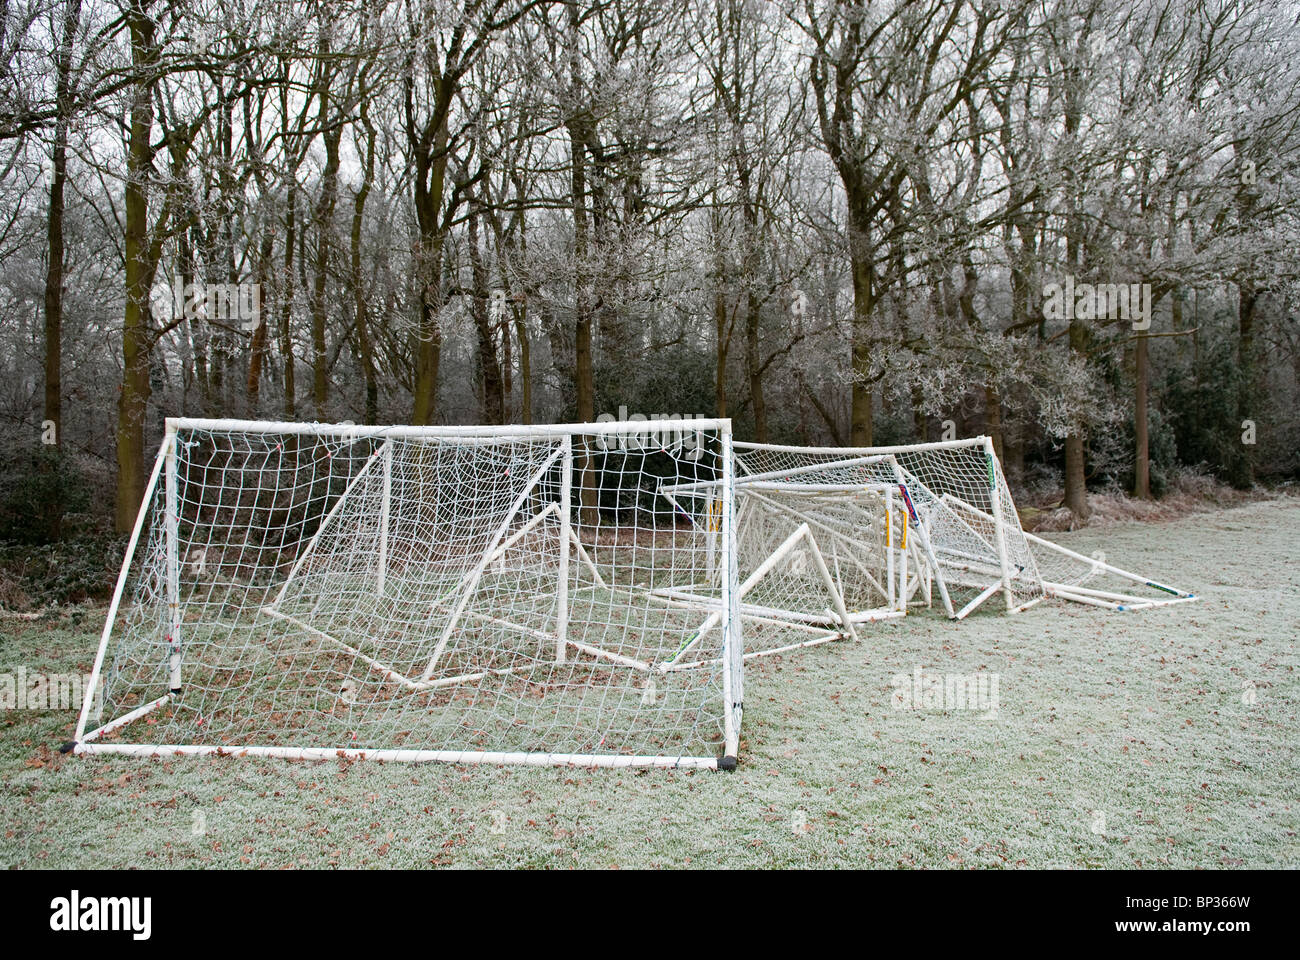 football, soccer, goals jumbled in a pile on a frosty day Stock Photo